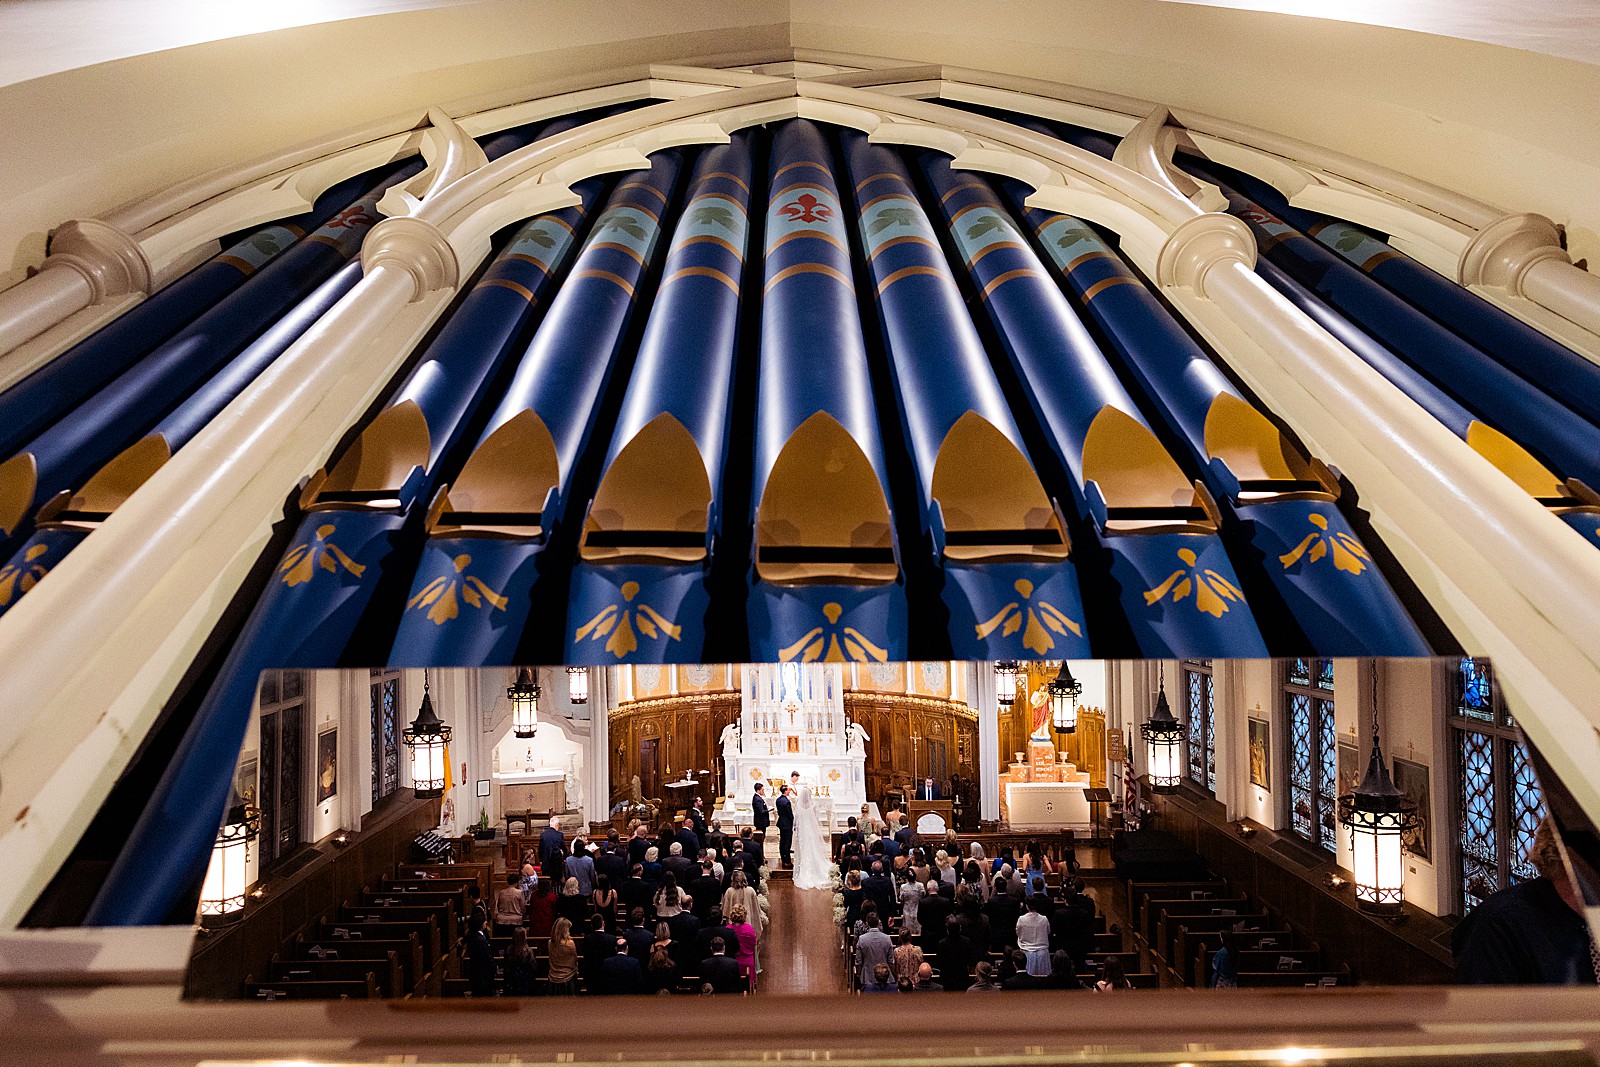 View of the wedding ceremony at Immaculate Conception church in DC reflected in the mirror of the organ.